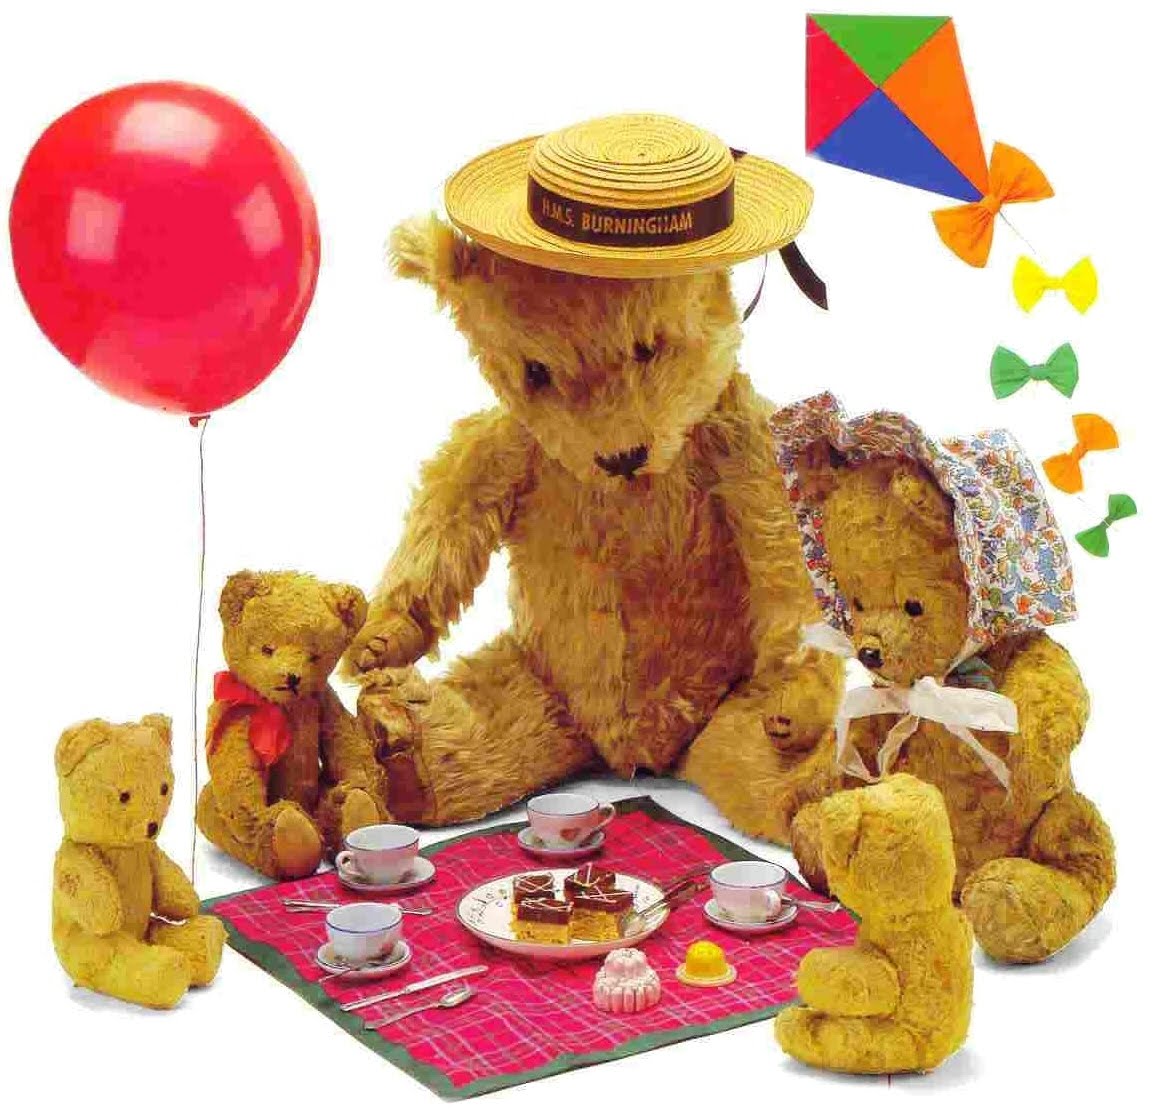 Upcoming Events   Teddy Bear S Picnic 2014   Bridgnorth Town Events